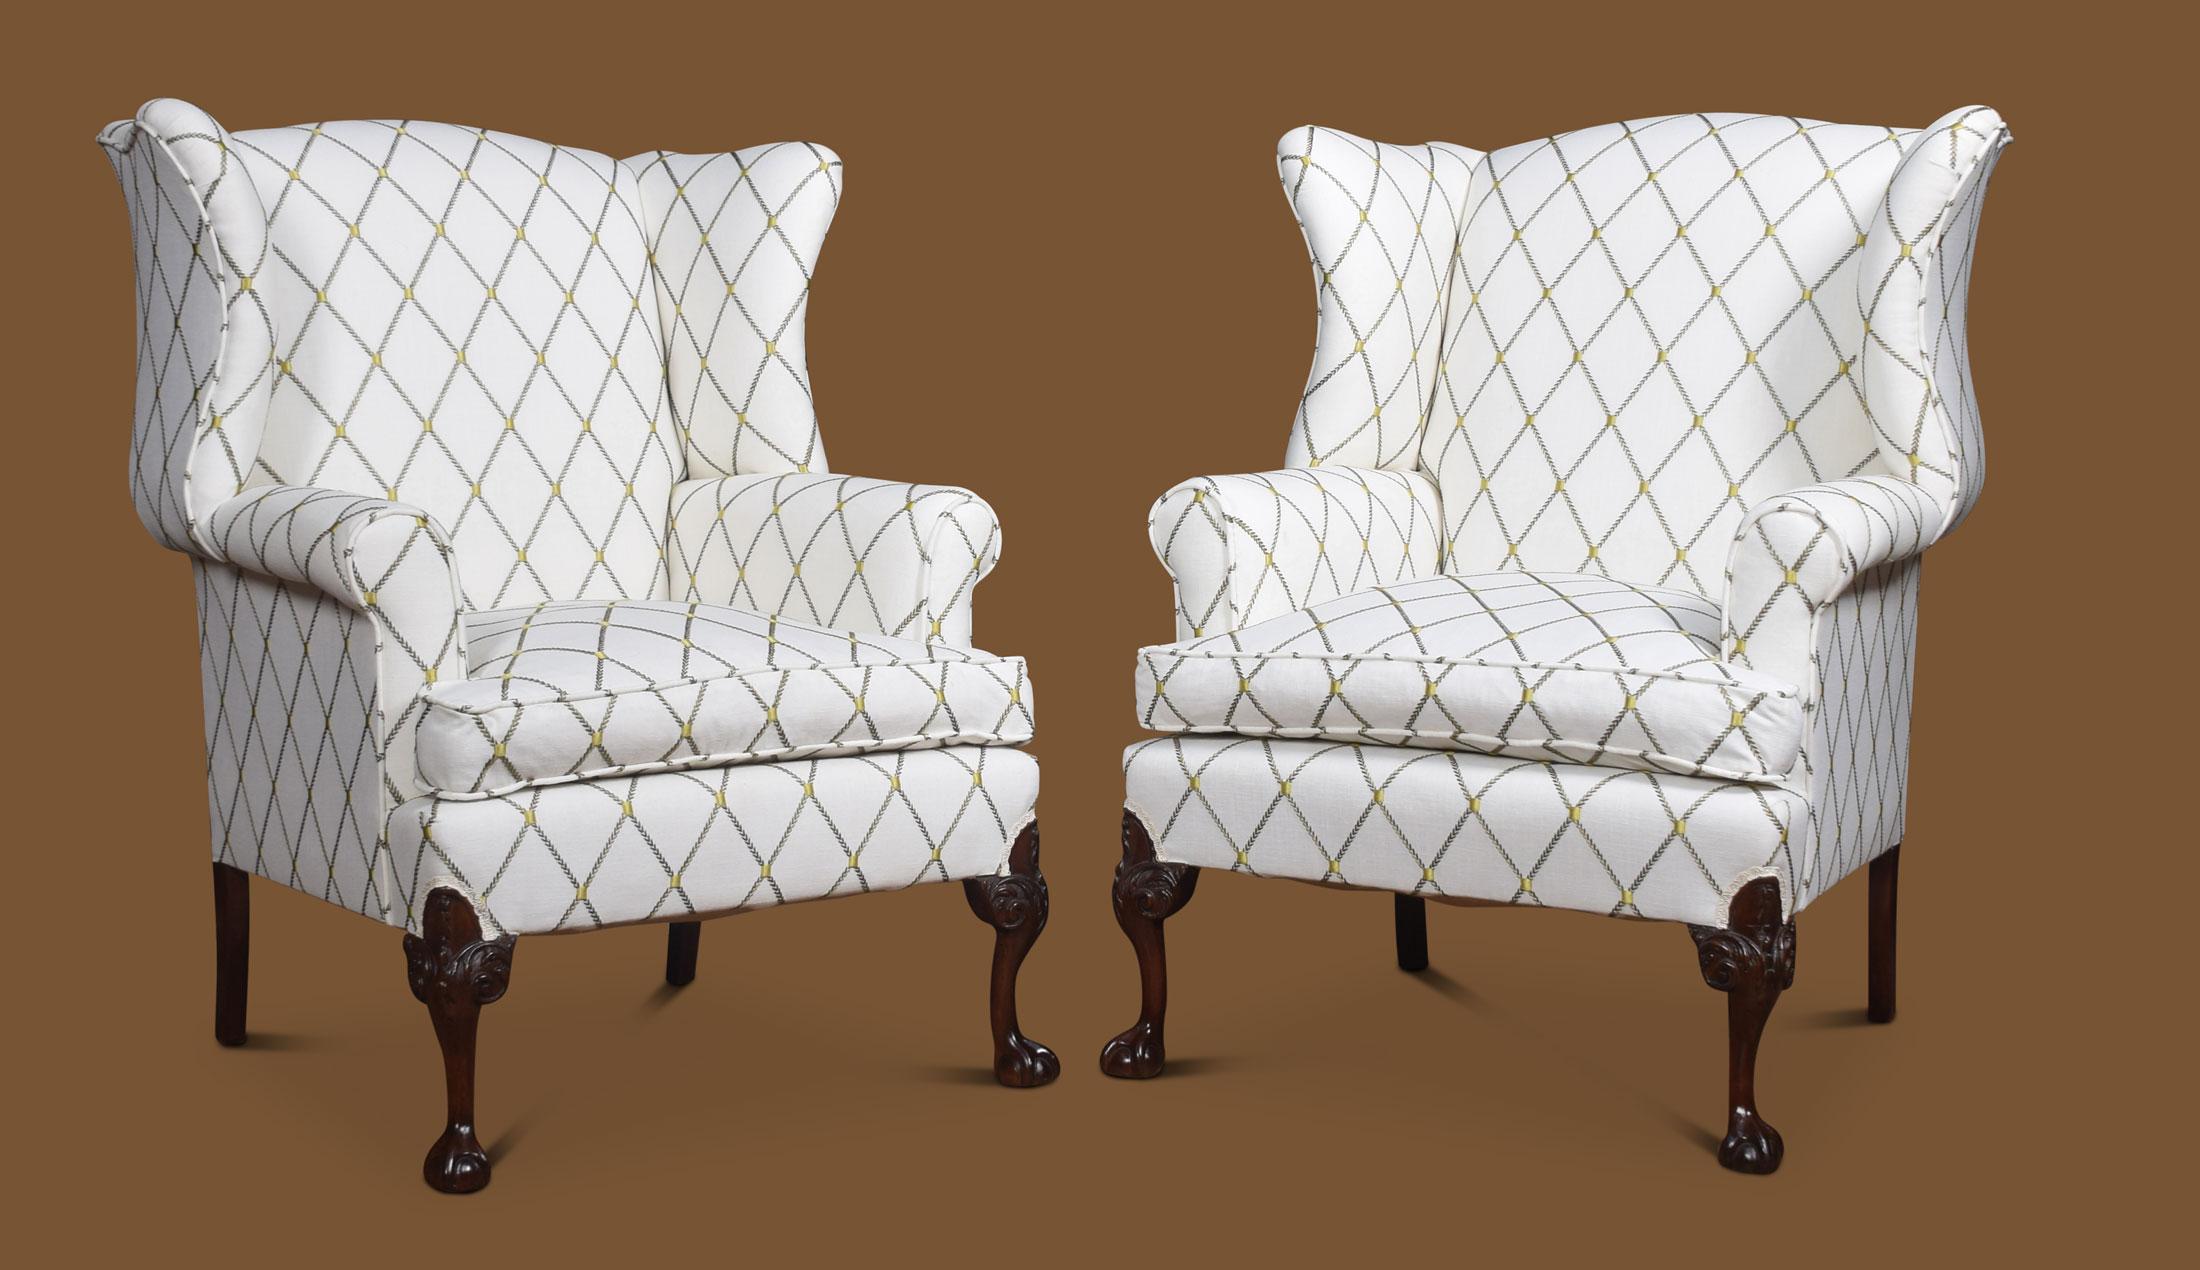 Very large pair of large Georgian style armchairs, the winged backs and out swept arms and removable cushion. Raised up on slender cabriole legs terminating in claw and ball feet.
Dimensions:
Height 43.5 inches height to seat 21 inches
Width 36